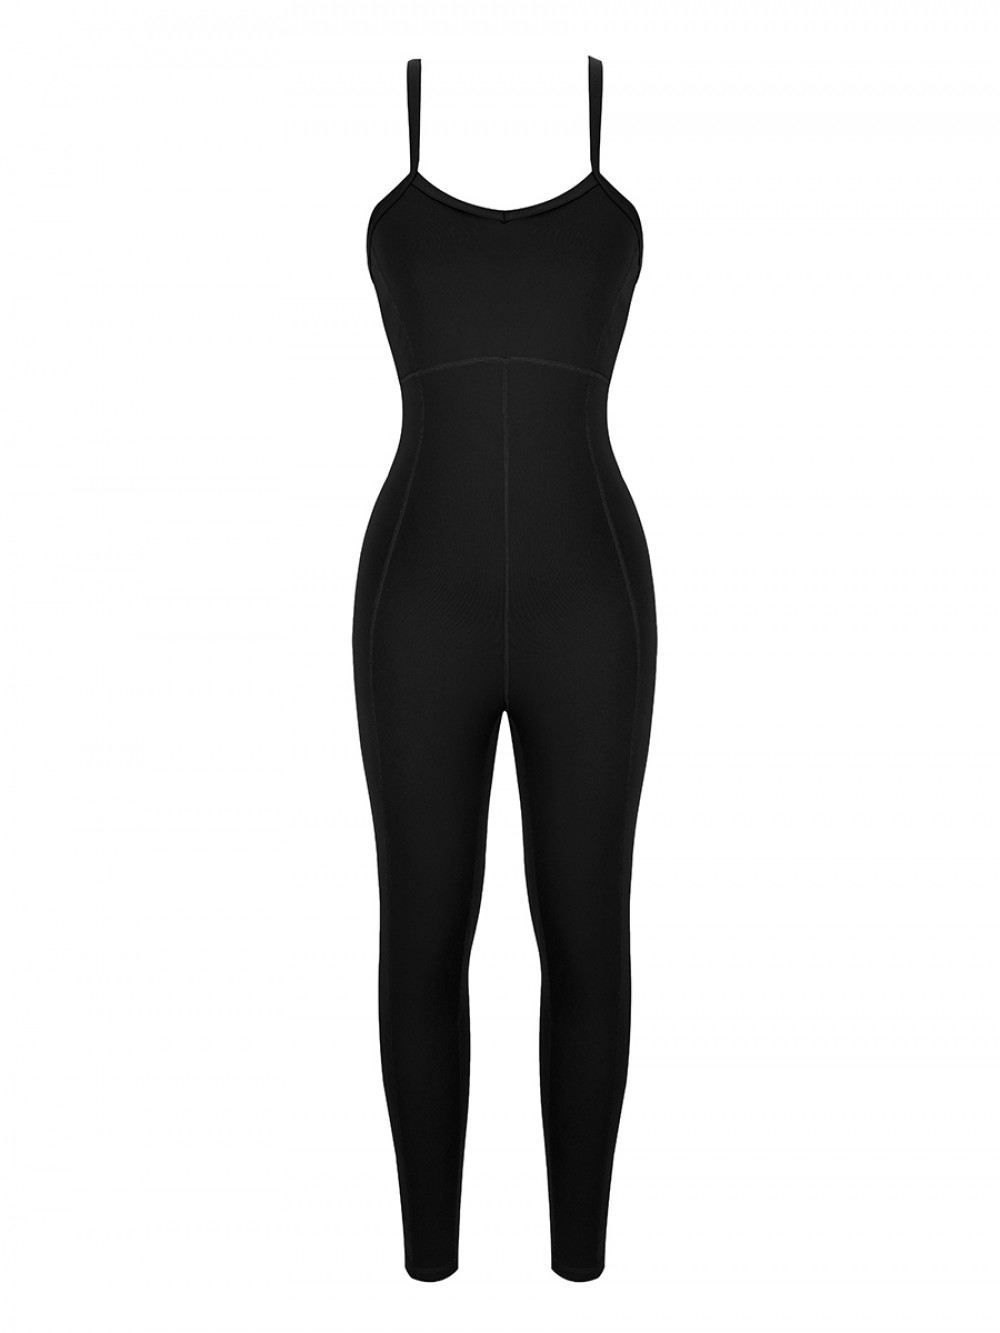 Black Strappy Back Removable Pads Yoga Bodysuit Kinetic Weekend